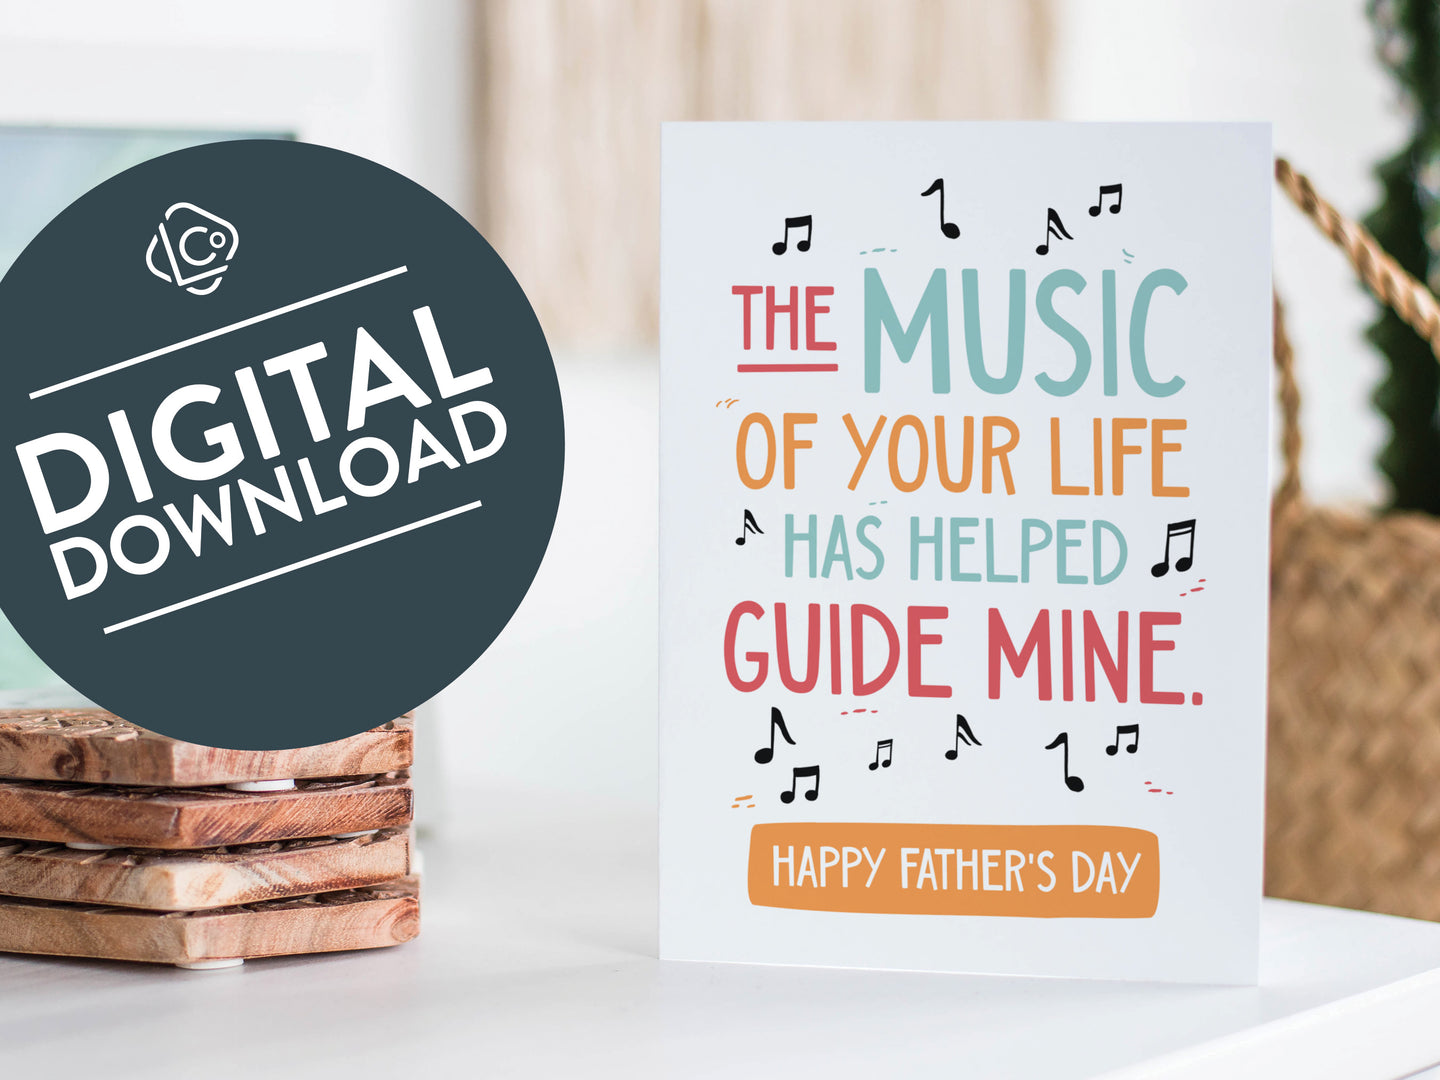 A greeting card featured standing up on a white tabletop with a framed photo of a succulent in the background and a stack of wooden coasters. There’s a woven basket in the background with a cactus inside. The card features the words “The music of your life has helped guide mine. Happy Father's Day.” The words 